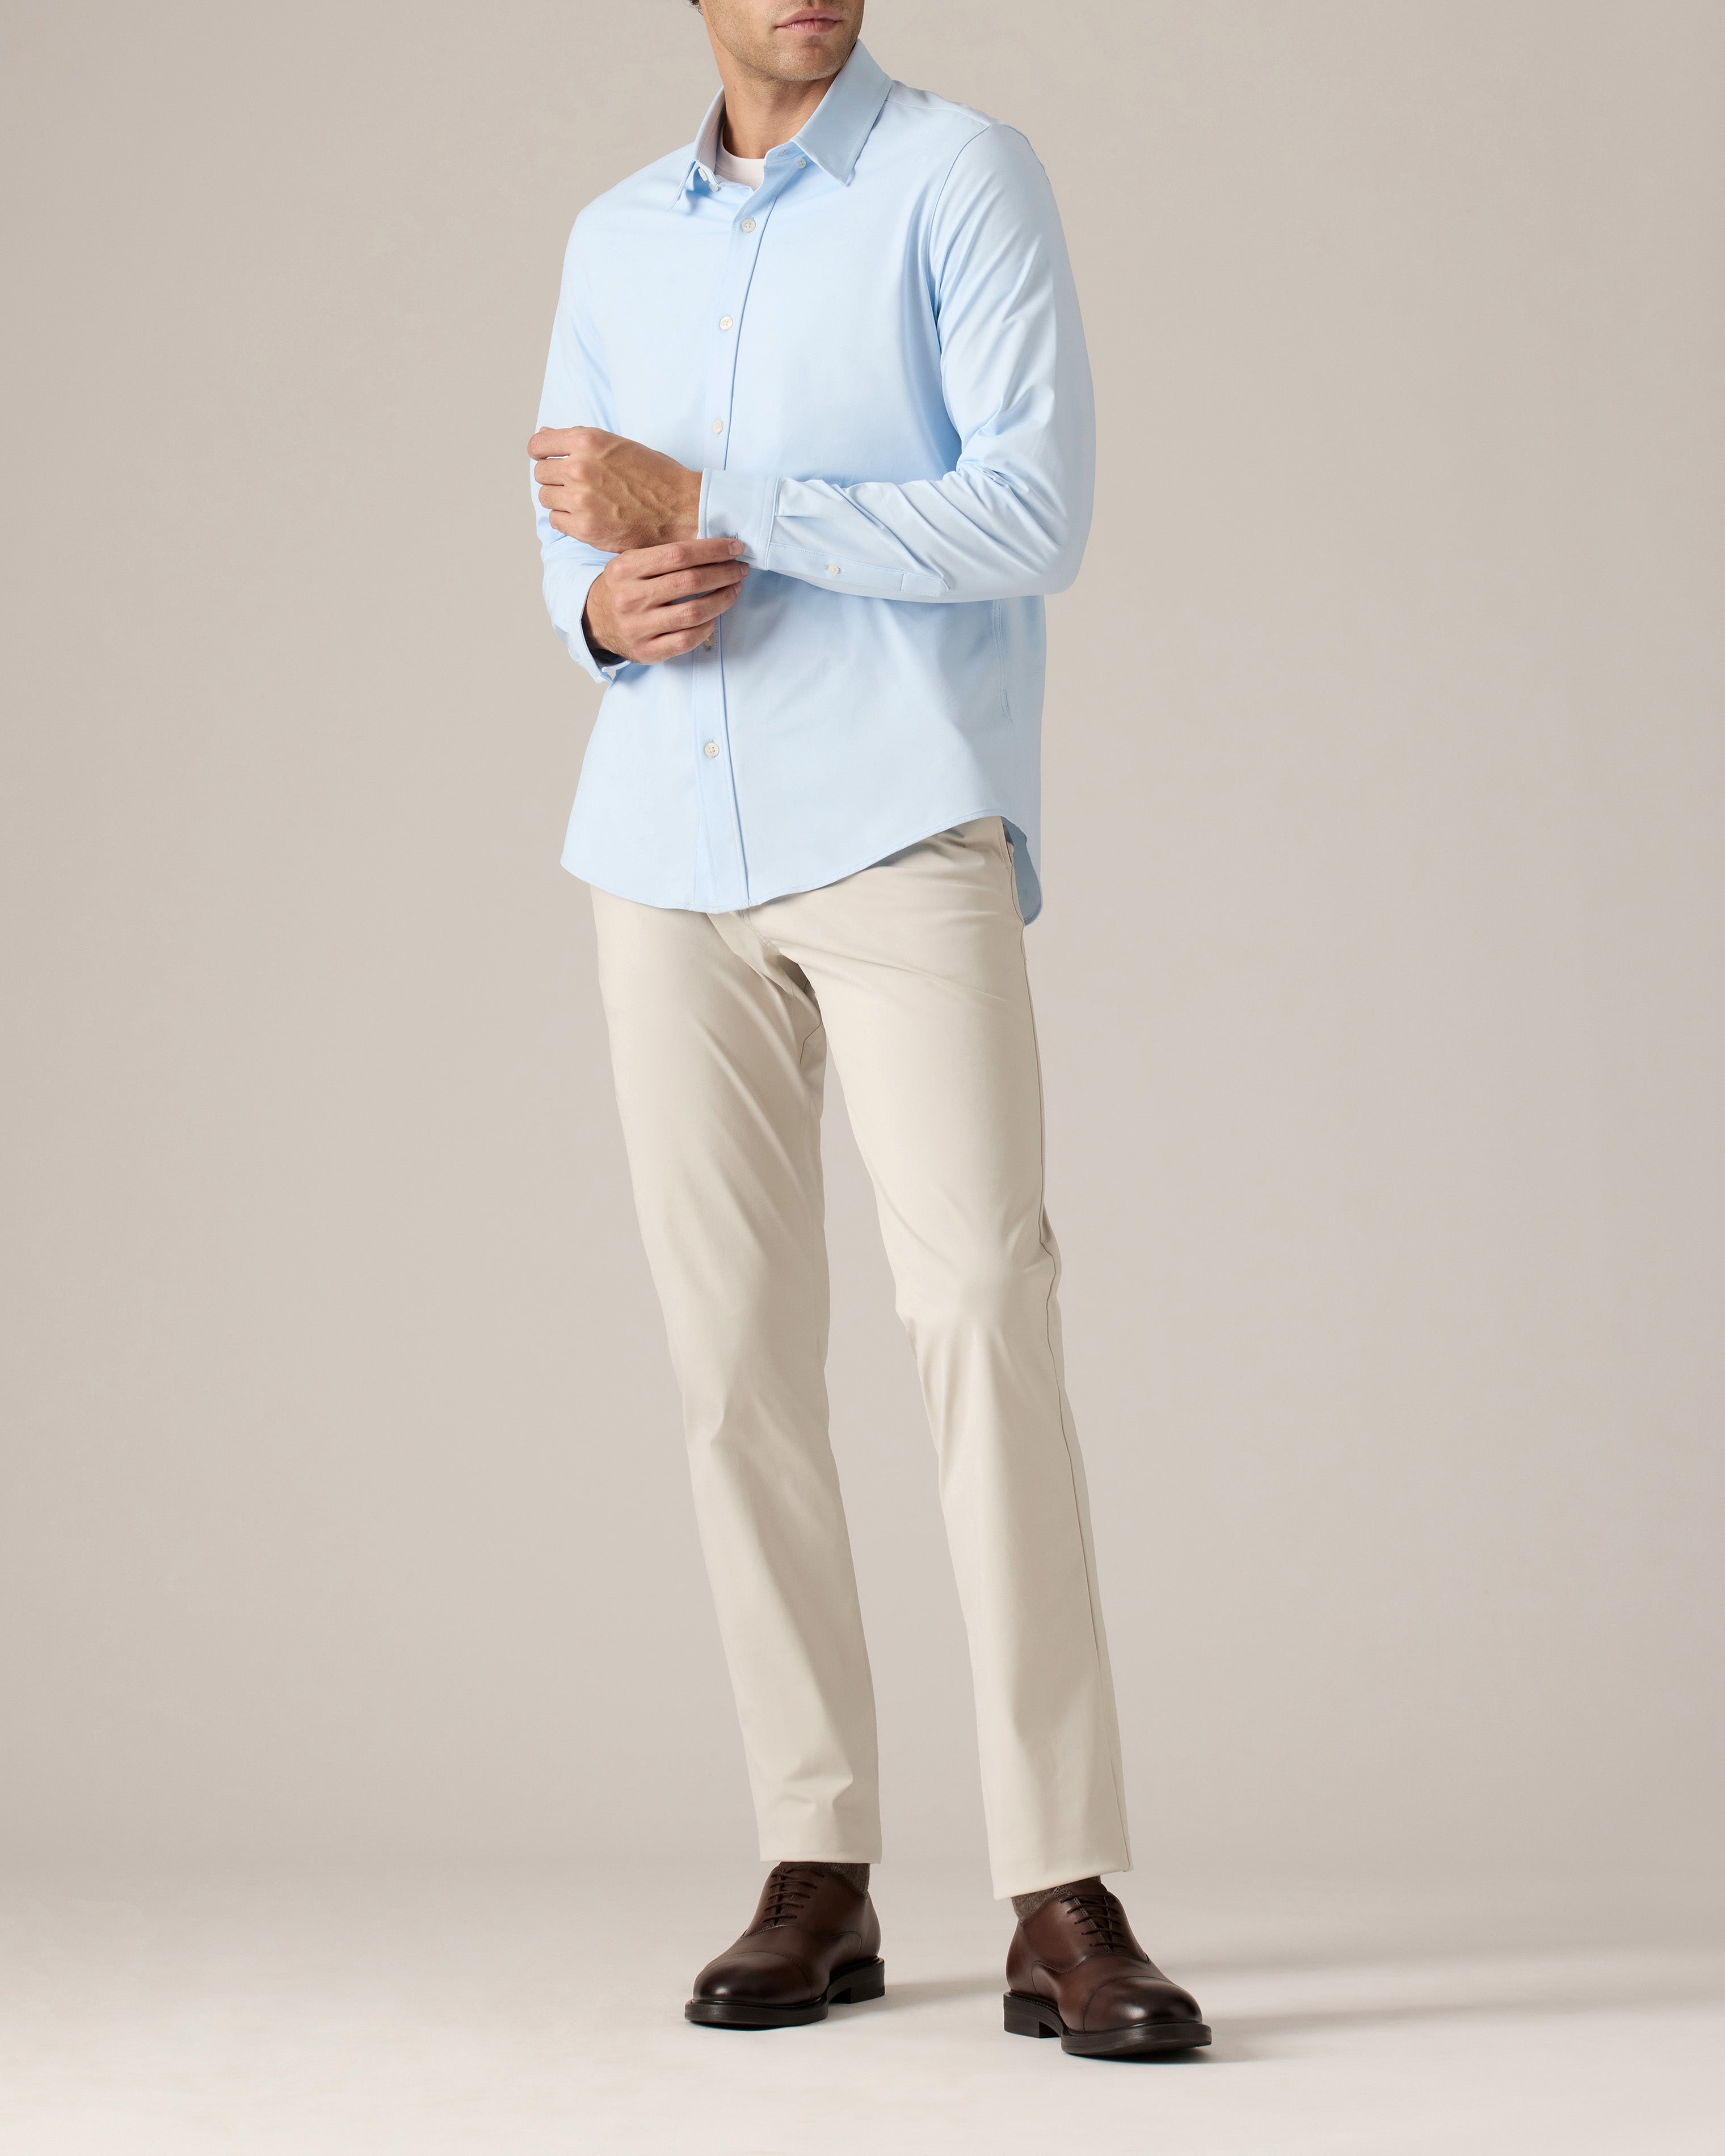 Beige Pants with Light Blue Shirt Outfits For Men (500+ ideas & outfits) |  Lookastic